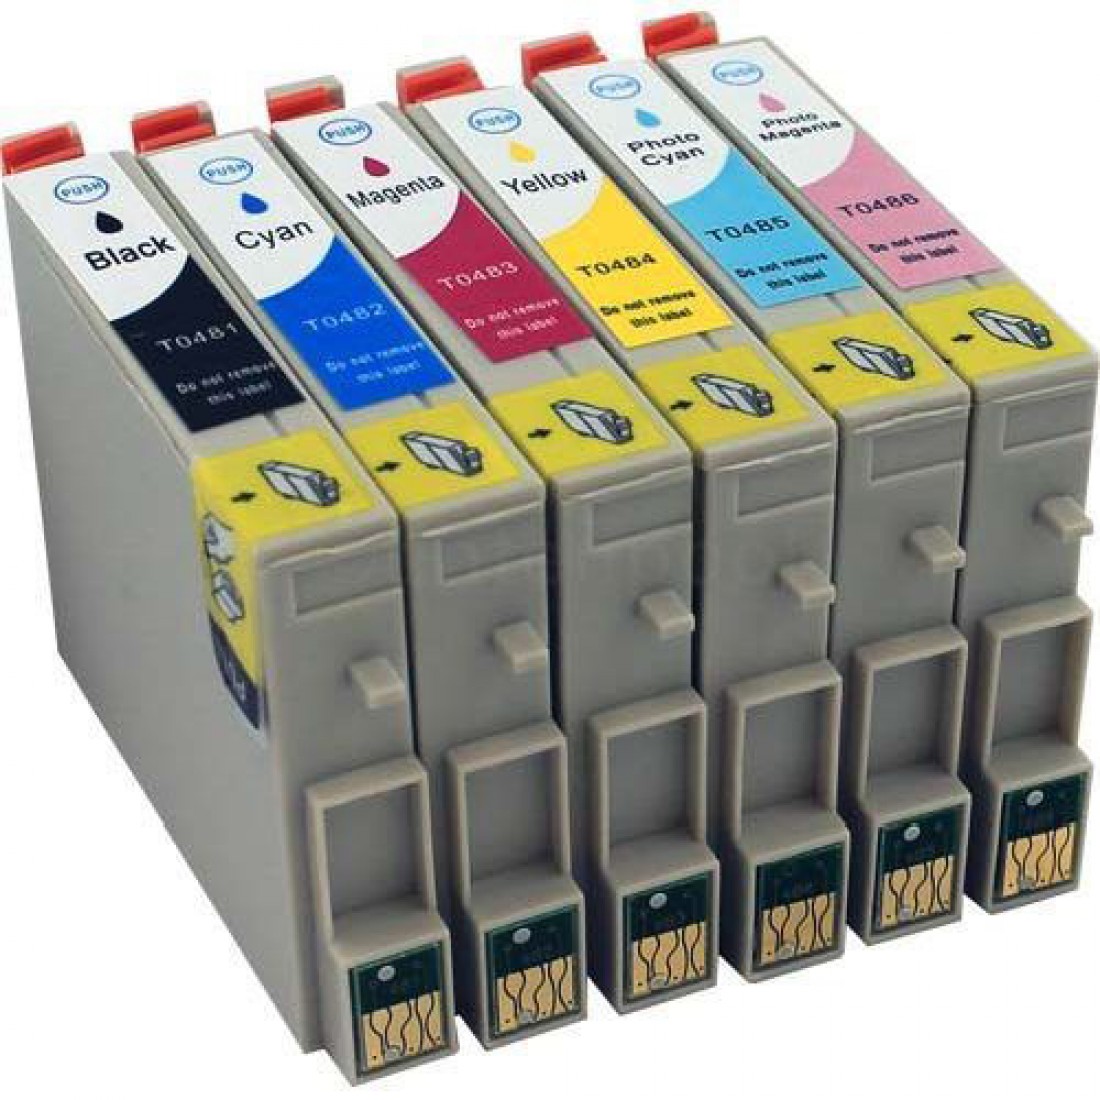 Epson T0491 T0496 49 Cartridges Cheap Epson 49 Inks In Value Pack 2387